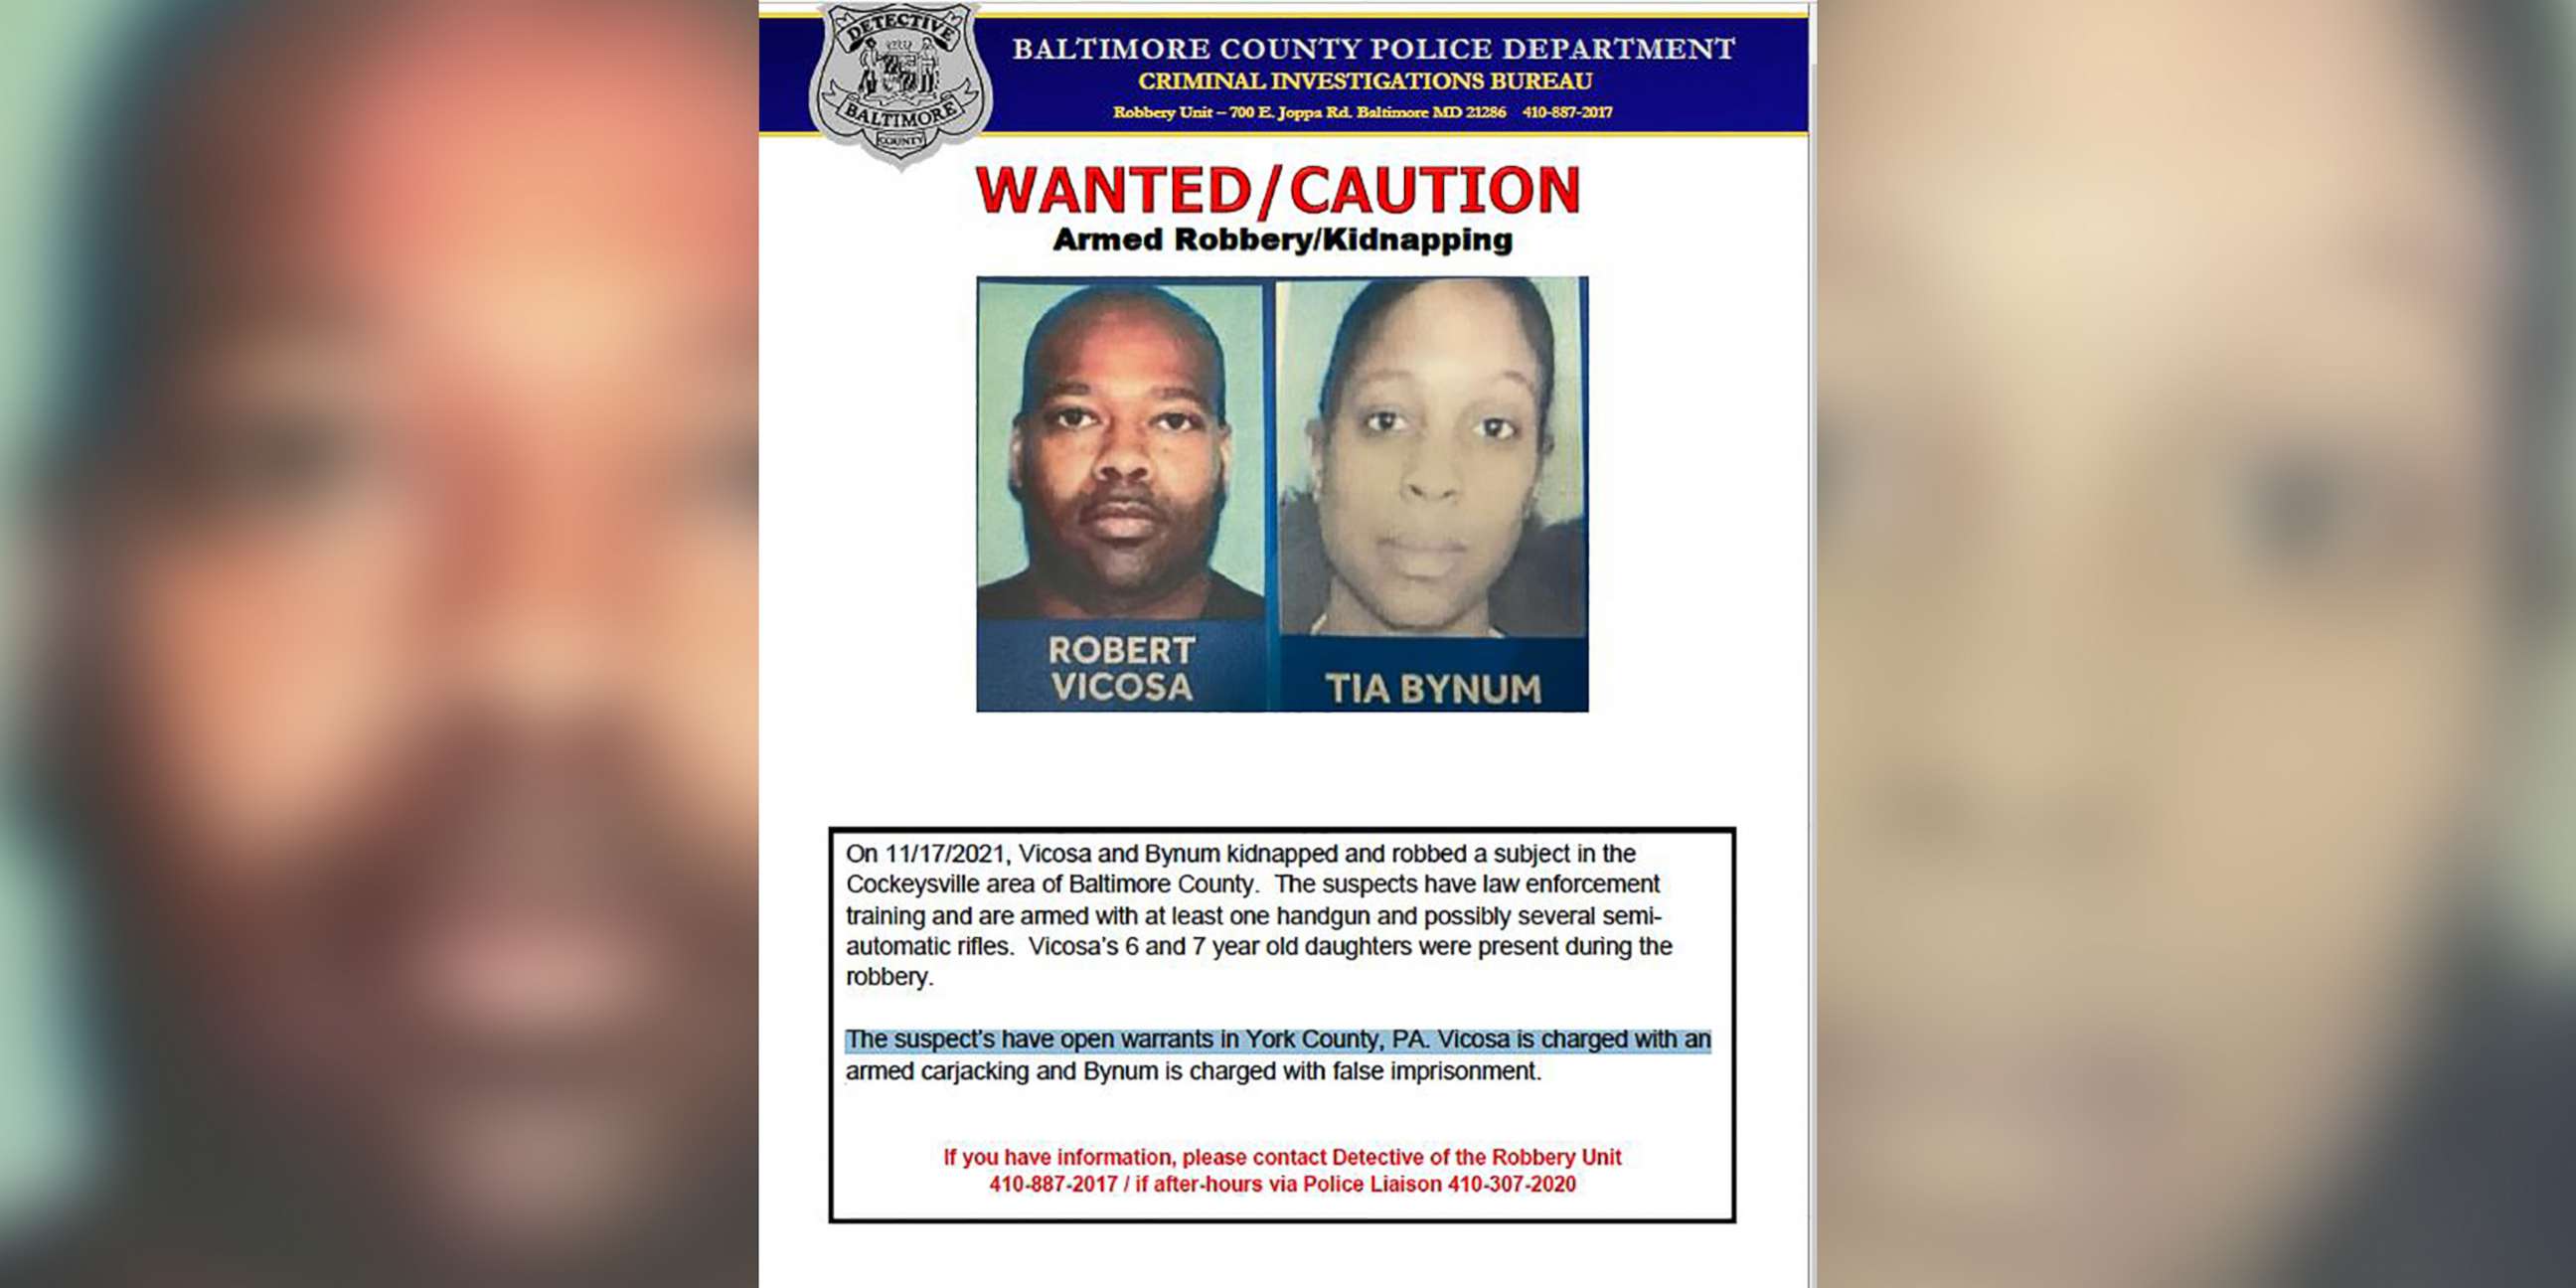 PHOTO: Baltimore County Police released this poster of Robert Vicosa and Tia Bynum wanted for armed robbery and kidnapping.